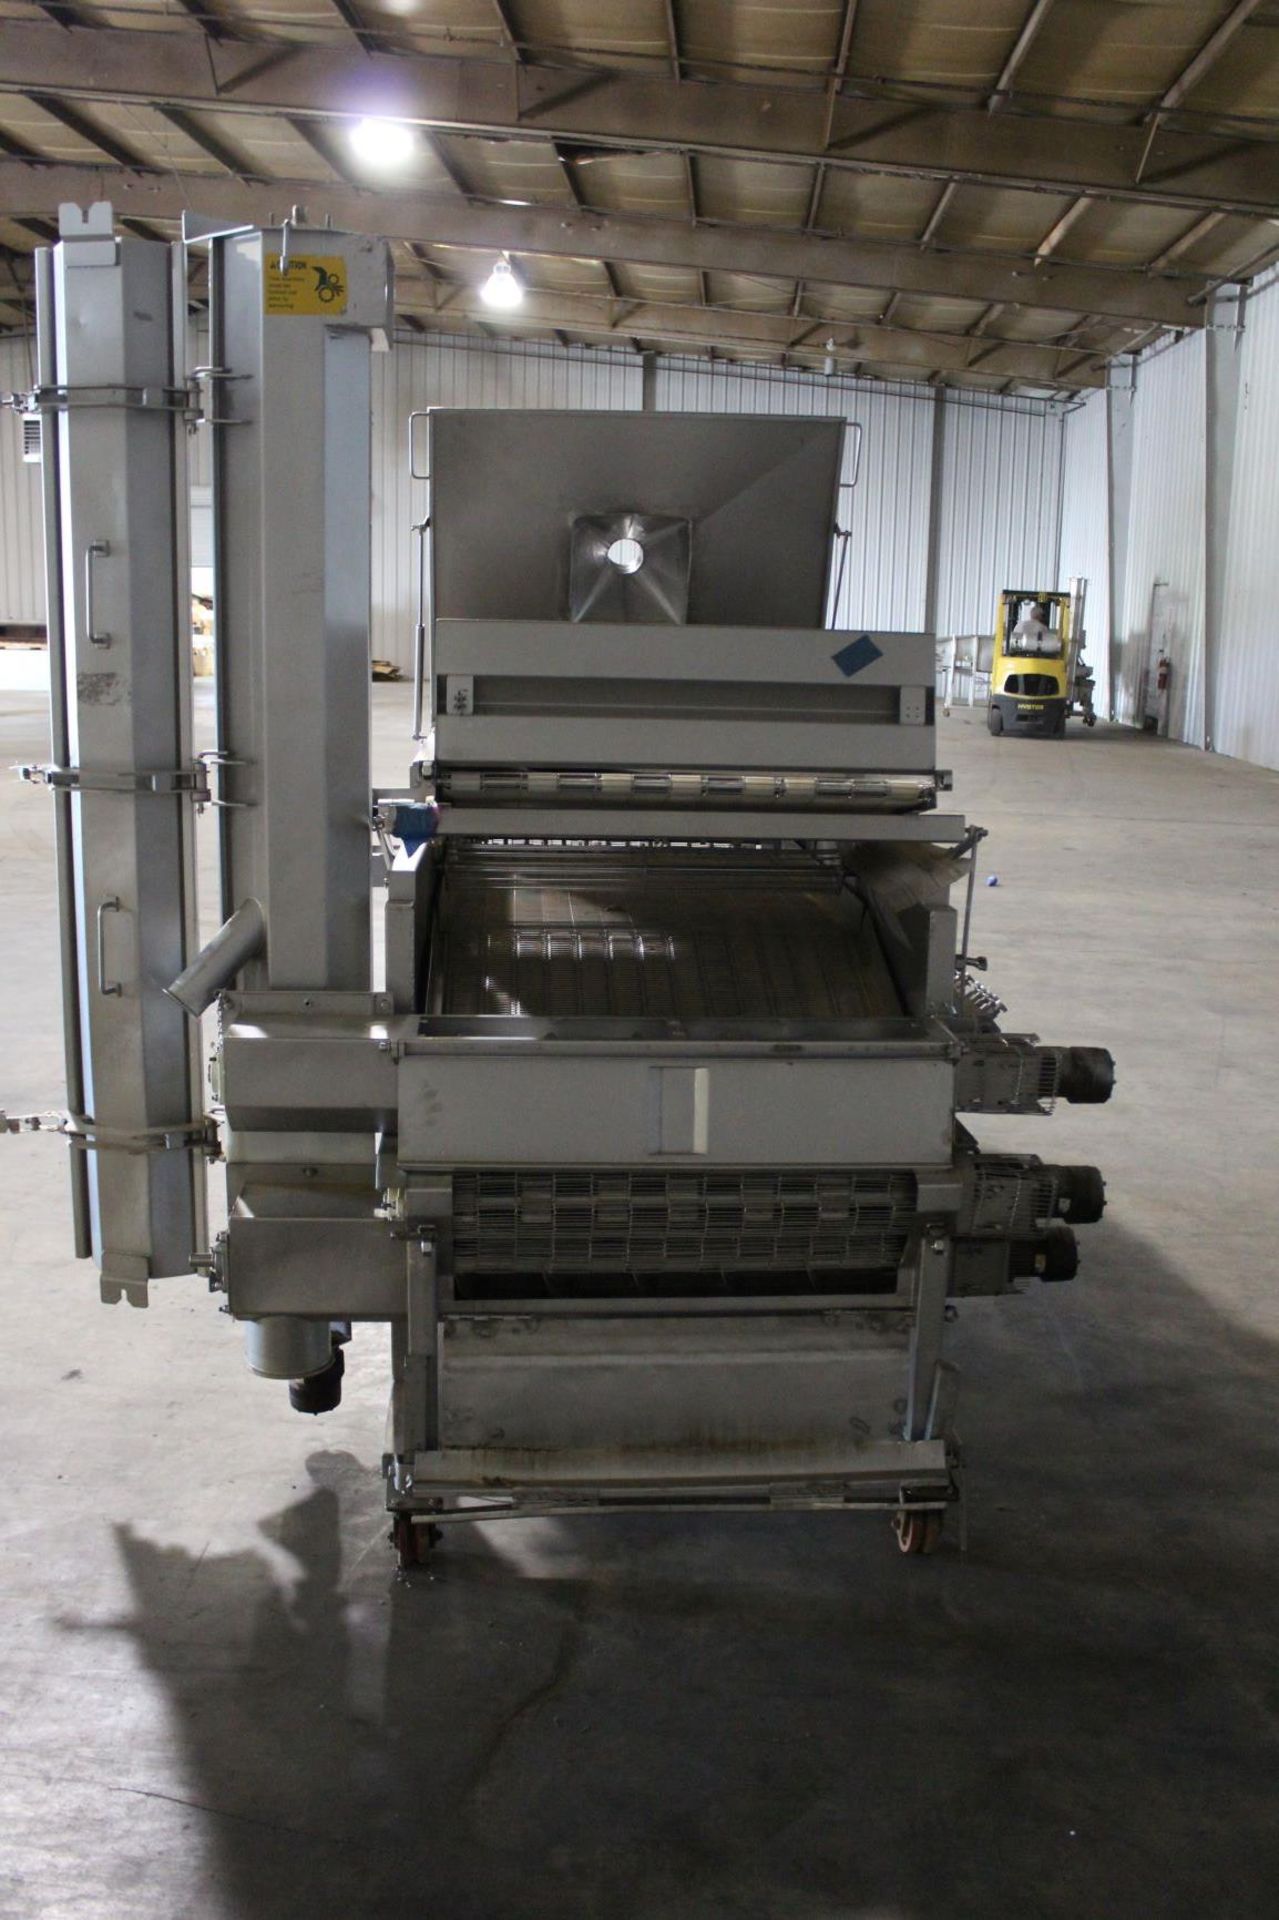 MP 34'' breader hydraulic, Item# bbncst34b-1, Located in: Cartersville, GA - Image 4 of 4